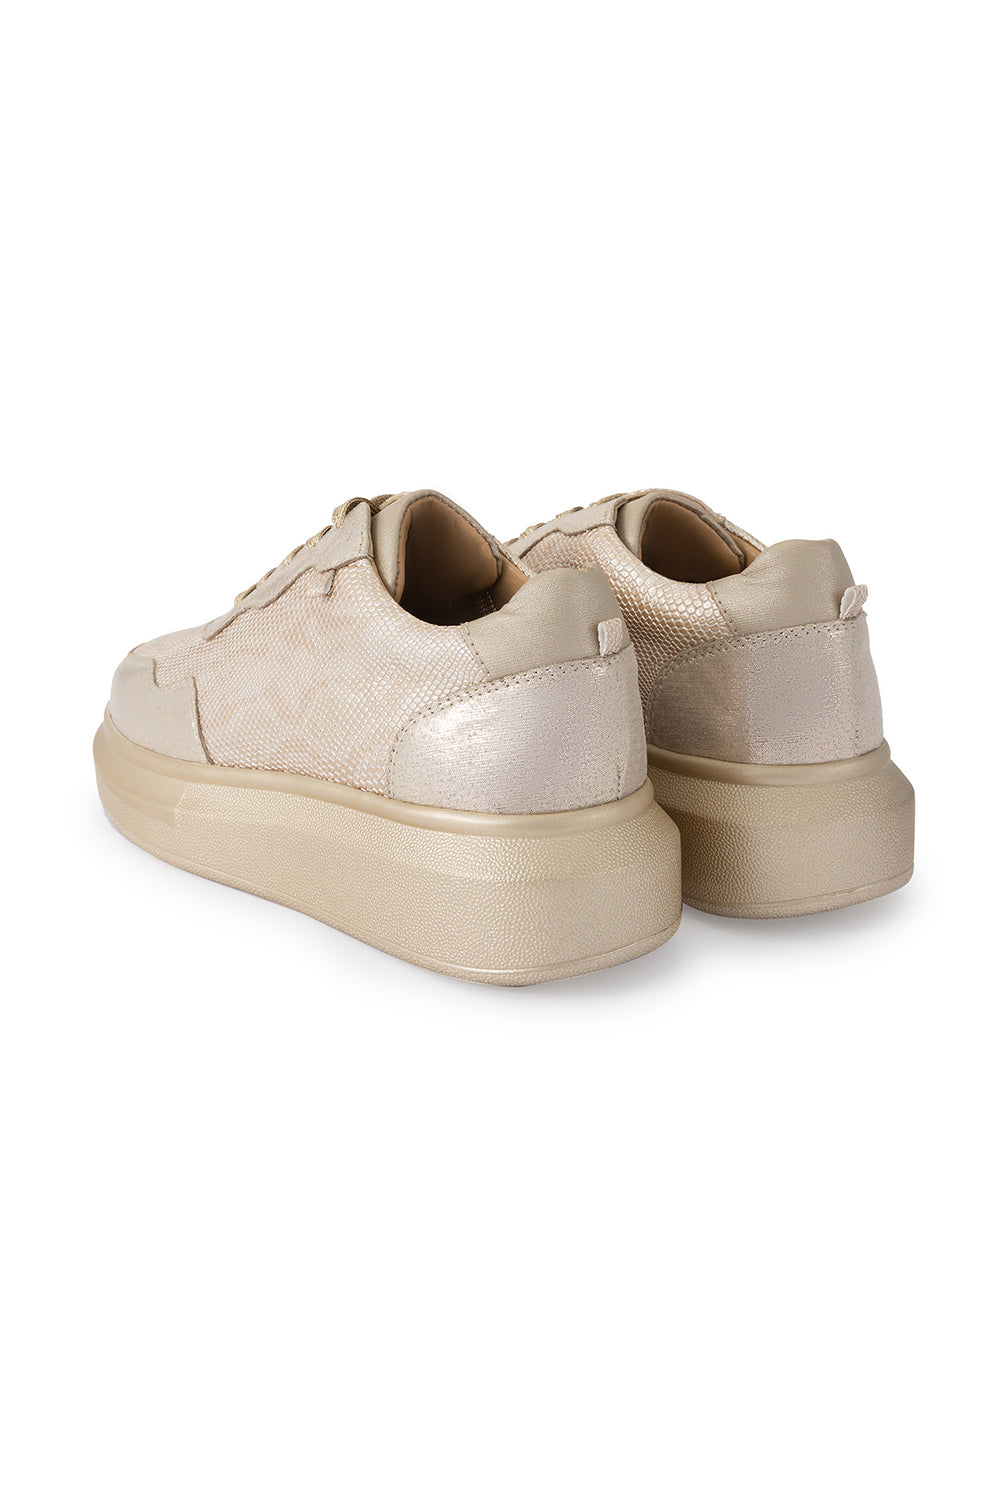 Champagne Gold Groove Classic Wedge Sneakers